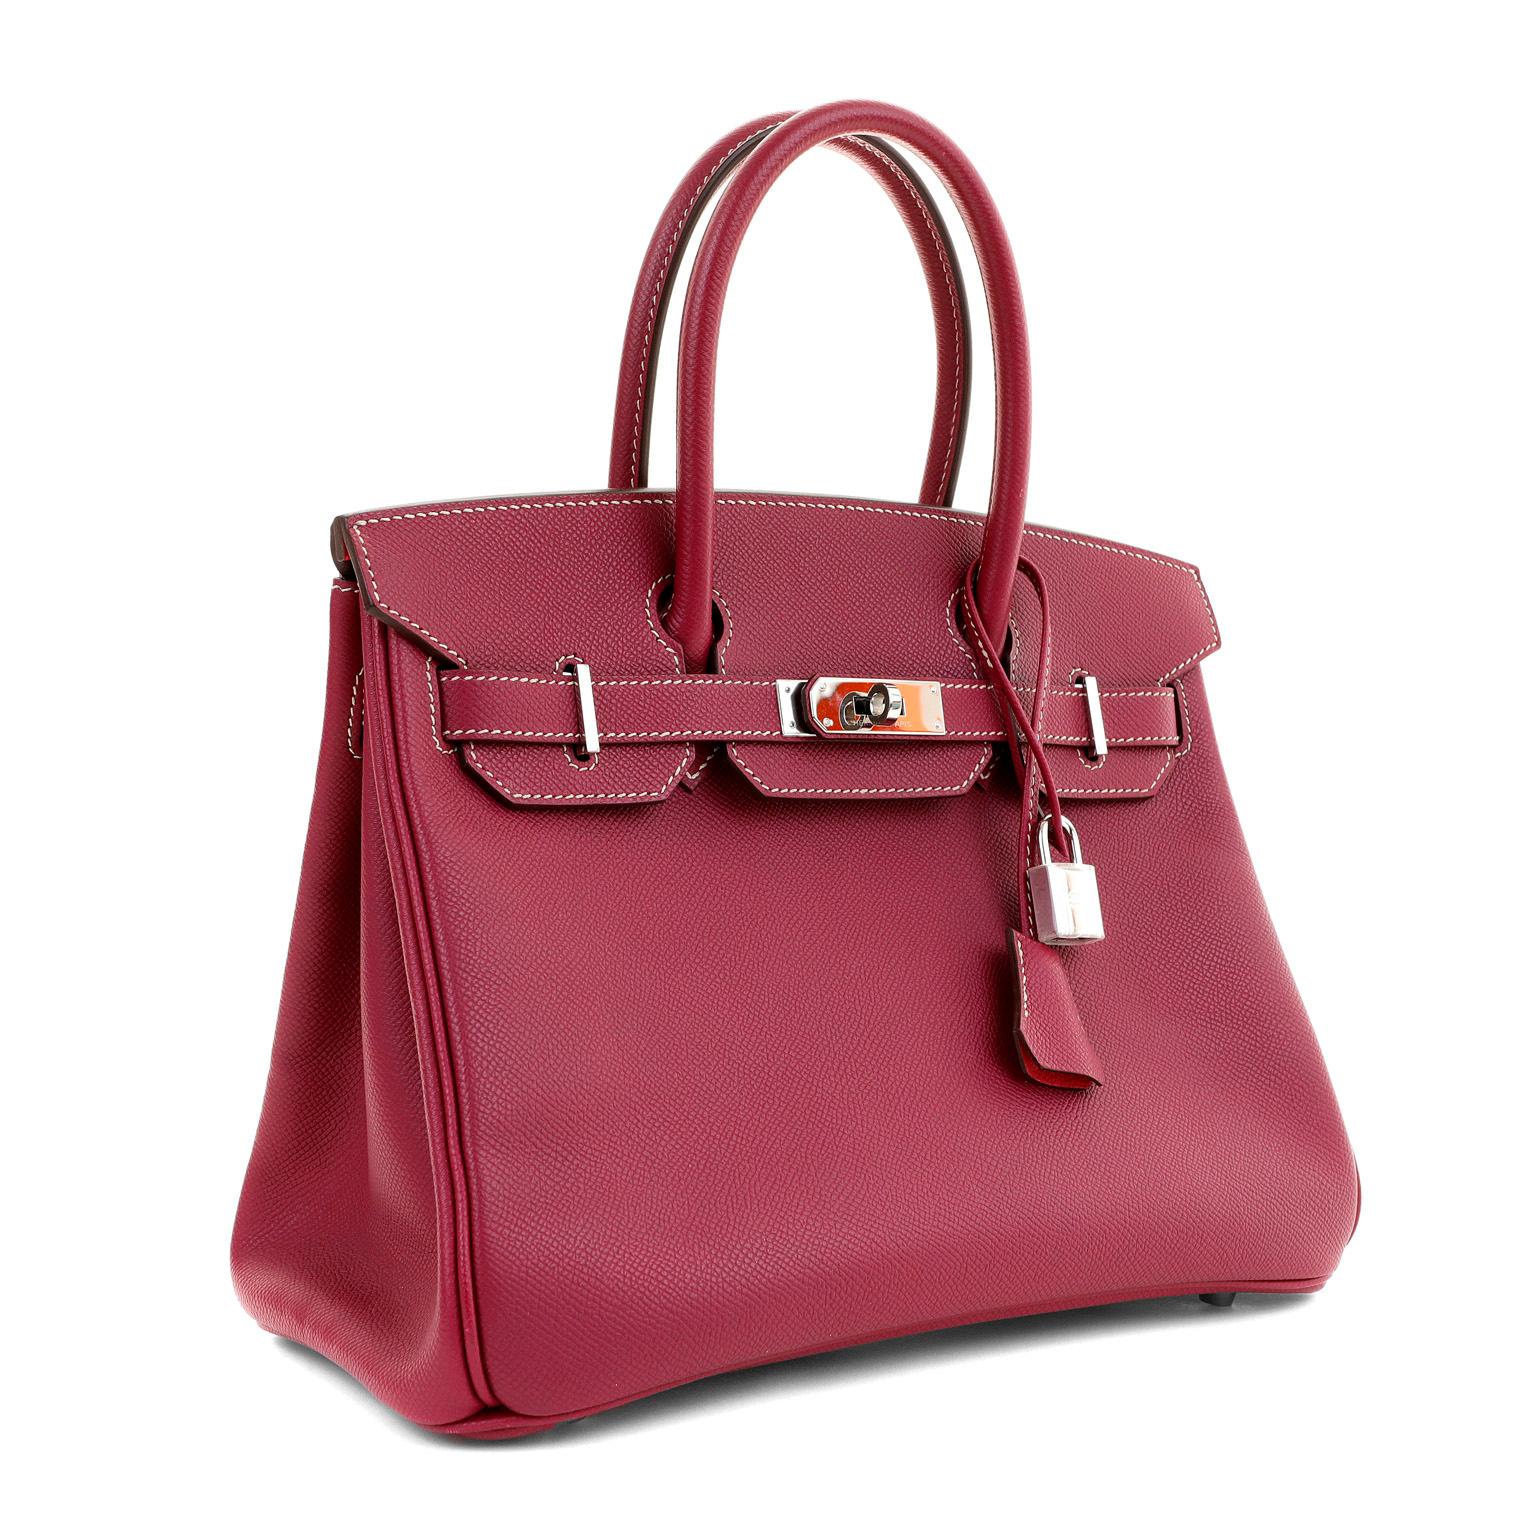 This authentic Hermès 30 cm Raspberry Pink Epsom Birkin is in pristine condition.  From the Candy Collection, this beautiful Birkin is accented with white stitching and brilliant Palladium hardware.

Epsom leather is textured and scratch resistant